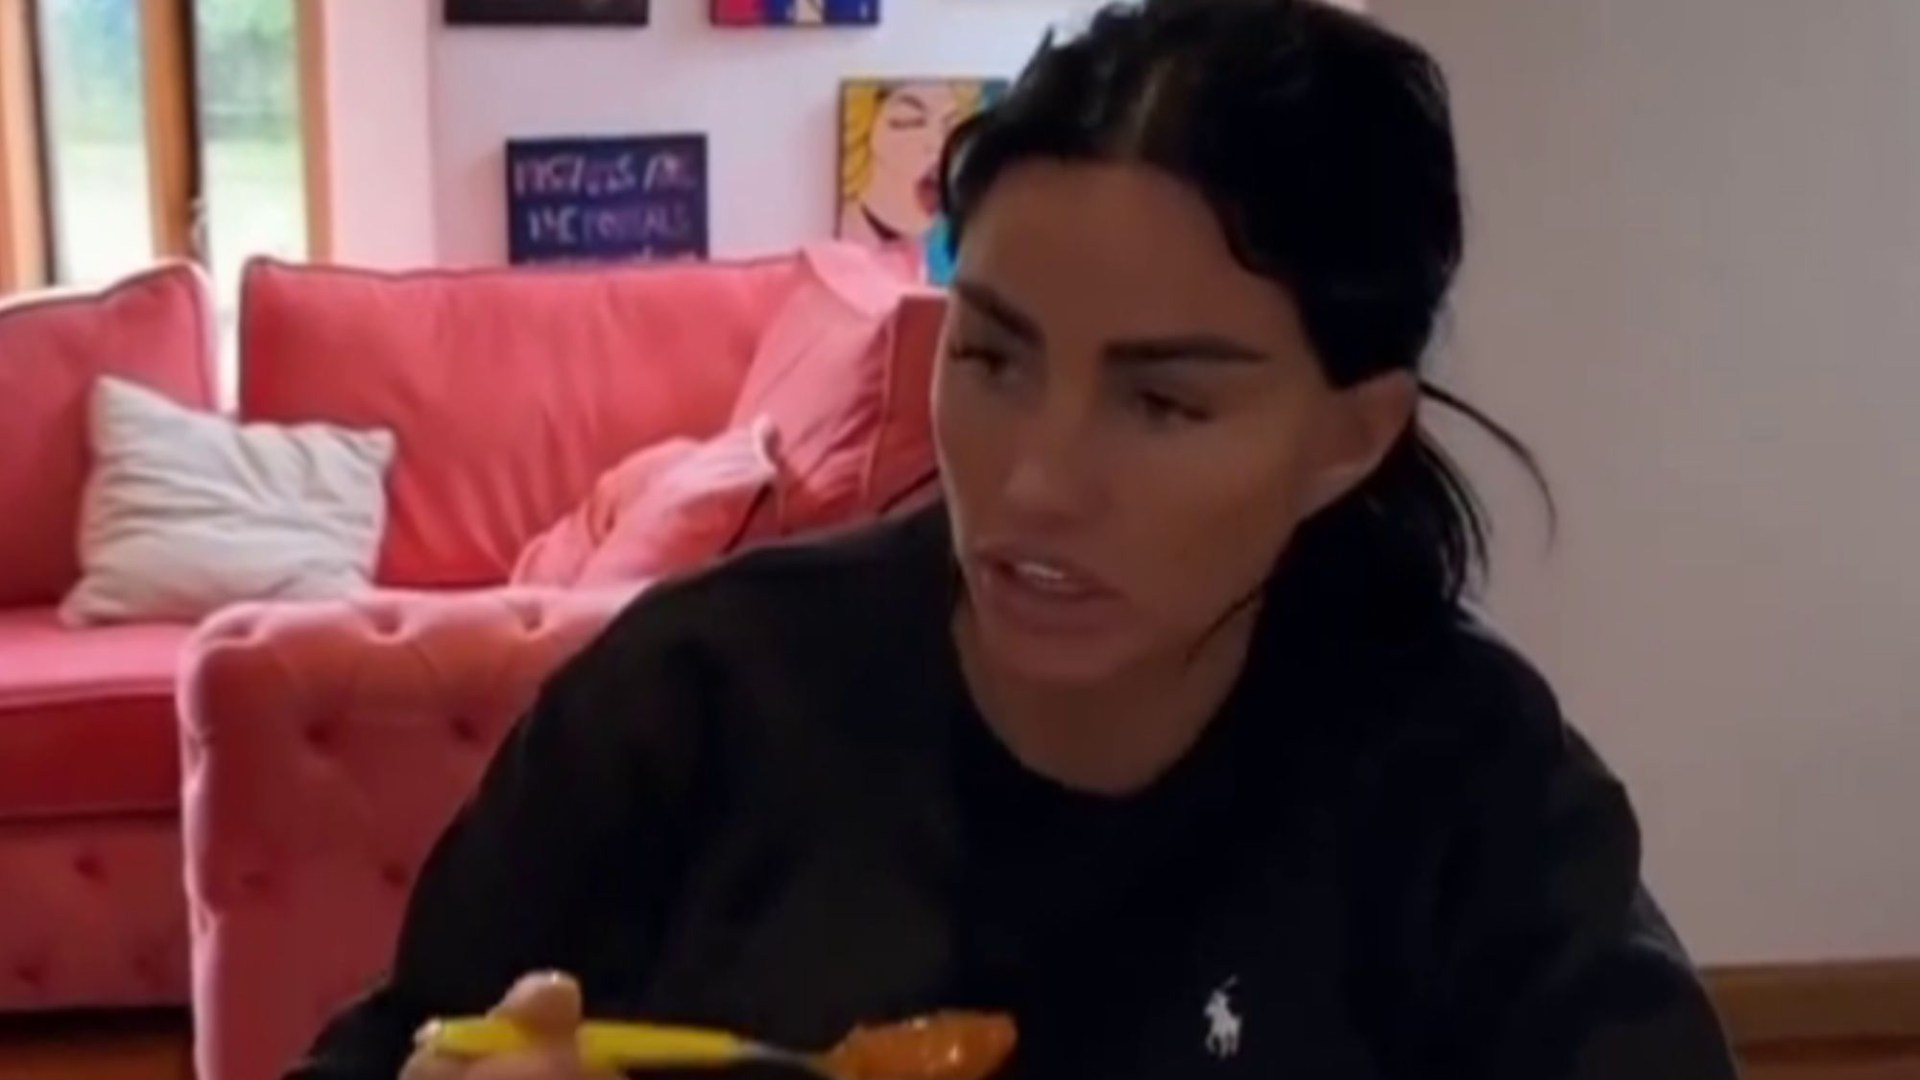 Katie Price’s Bankruptcy Scandal: Why Her Diet Food Ad Was Banned and Backlash Over Low Calorie Promotions